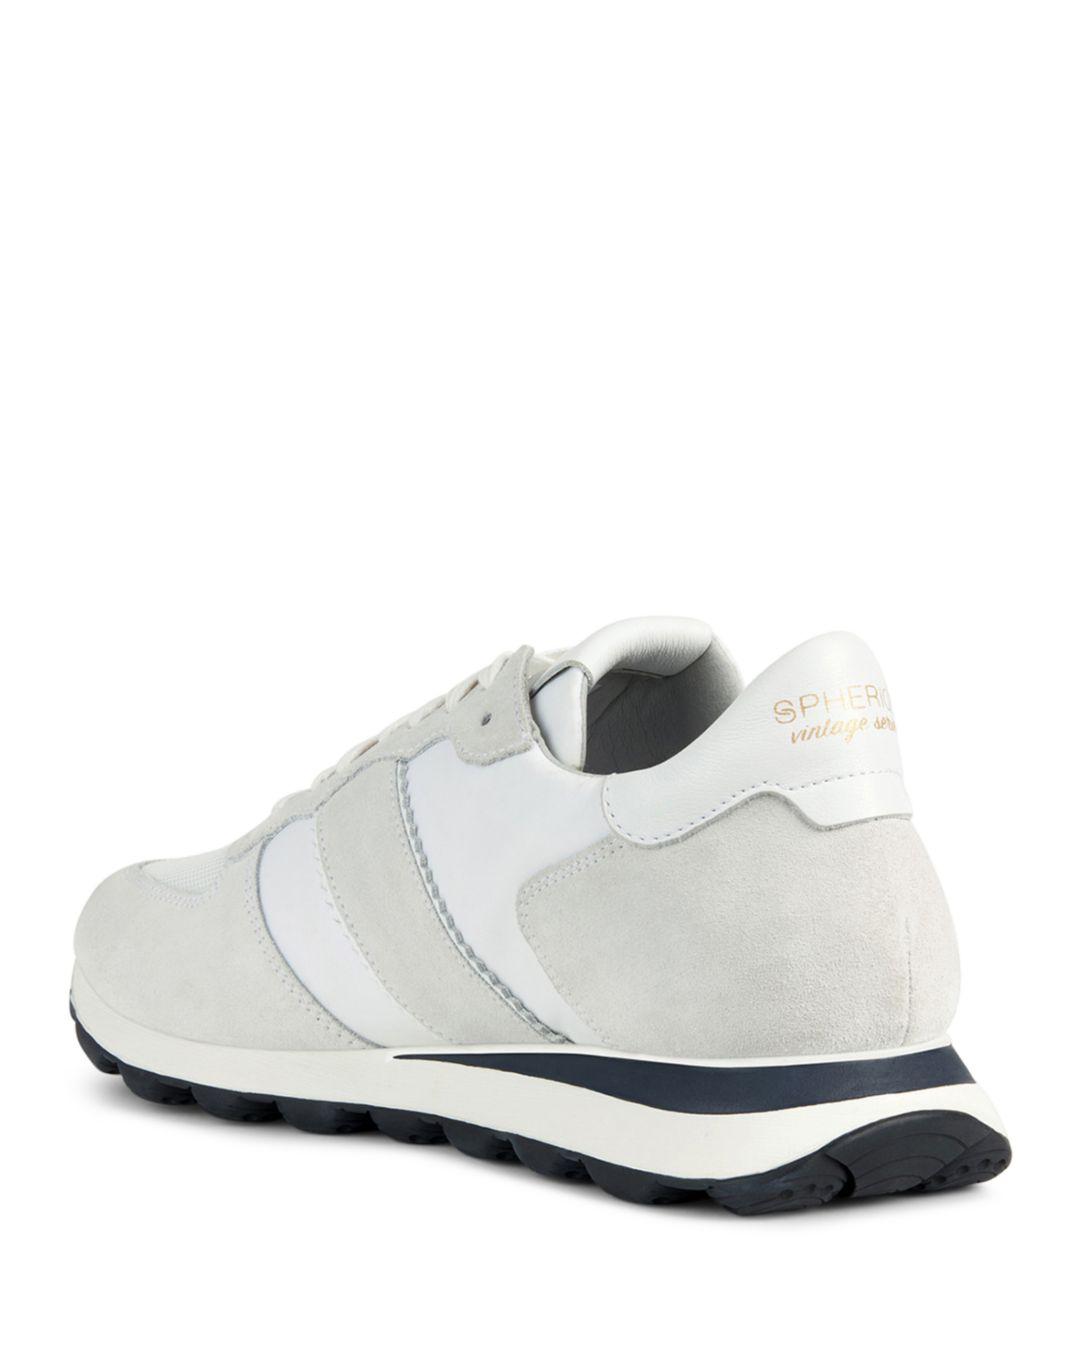 Geox Spherica V Series Lace Up Sneakers in White for Men | Lyst